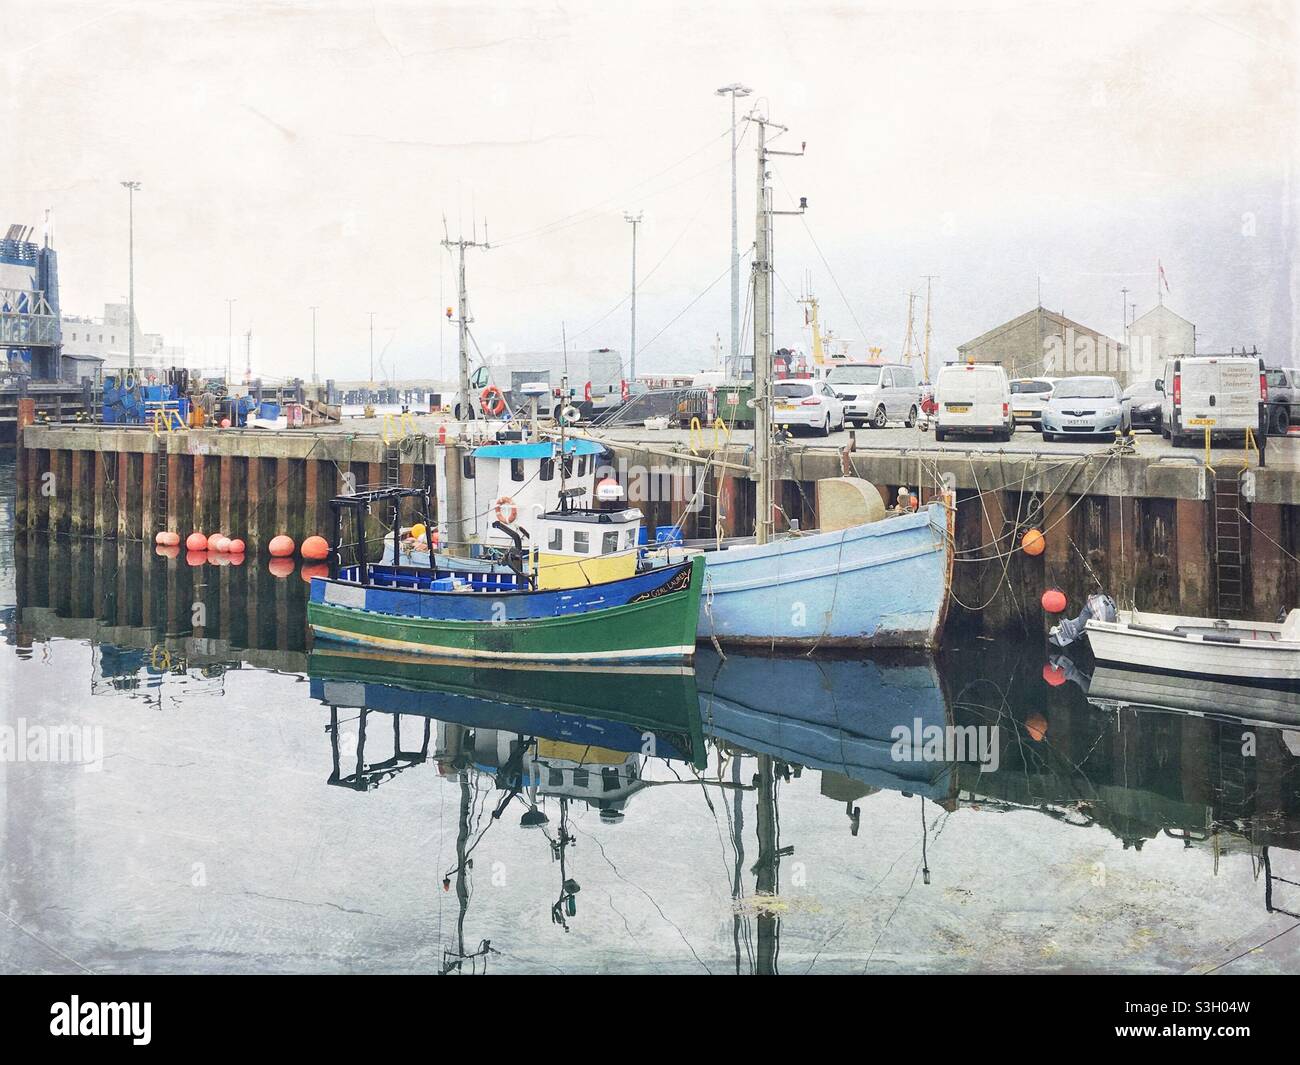 Small fishing boats in Stromness Harbour on an overcast day, image processed to have a grungy, nostalgic feeling Stock Photo